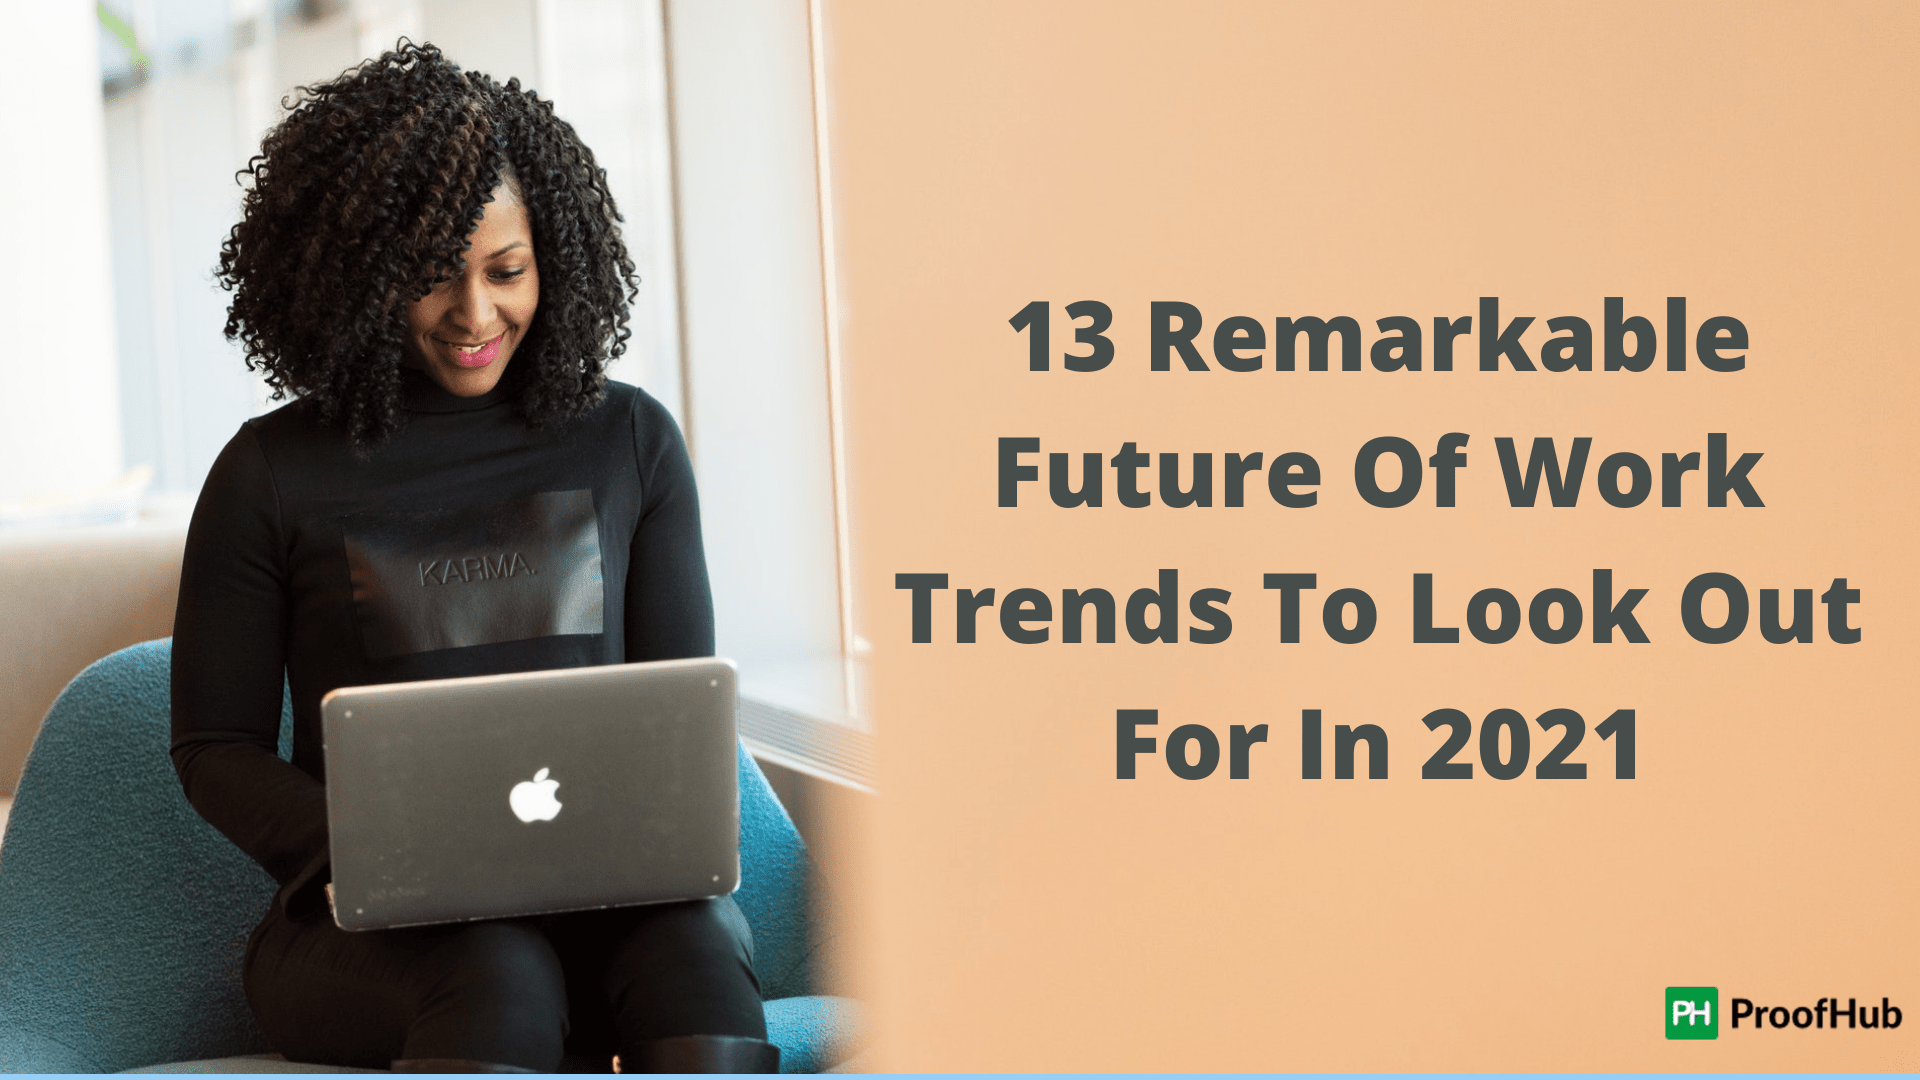 The Future Of Work: 13 Of The Most Remarkable Trends To Look Out For